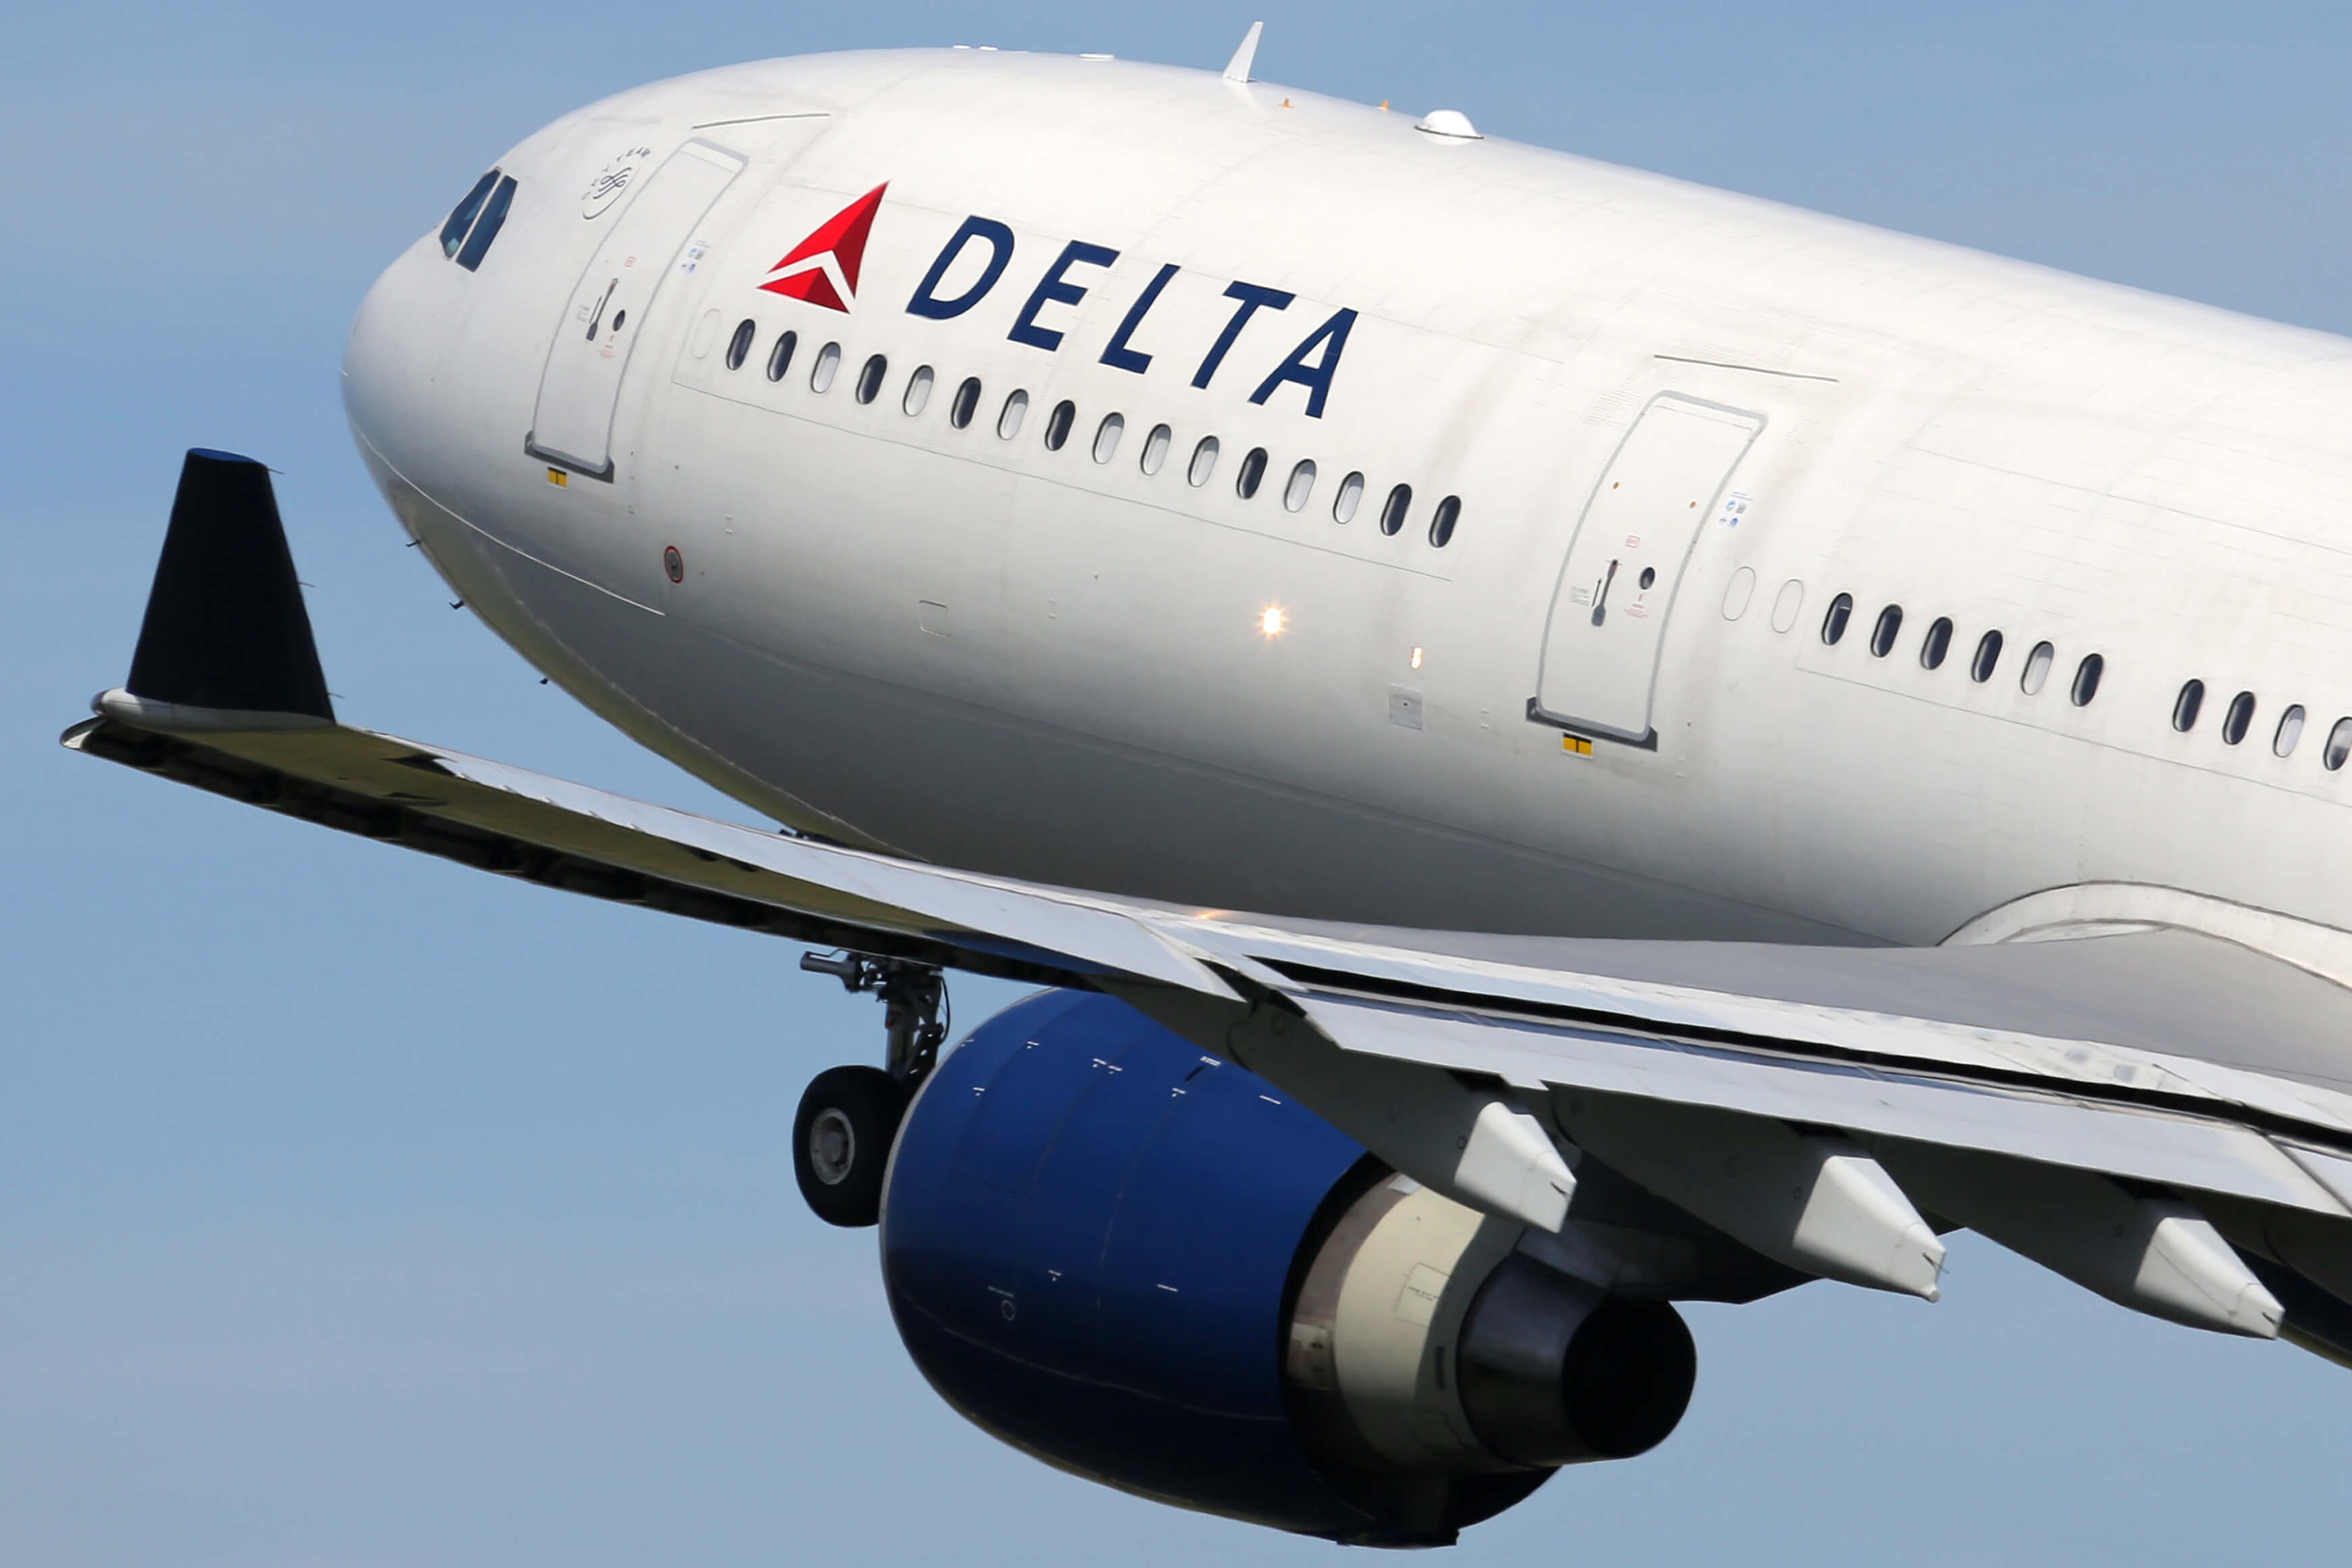 Delta resumes flights between U.S. and China, becoming first U.S. airline